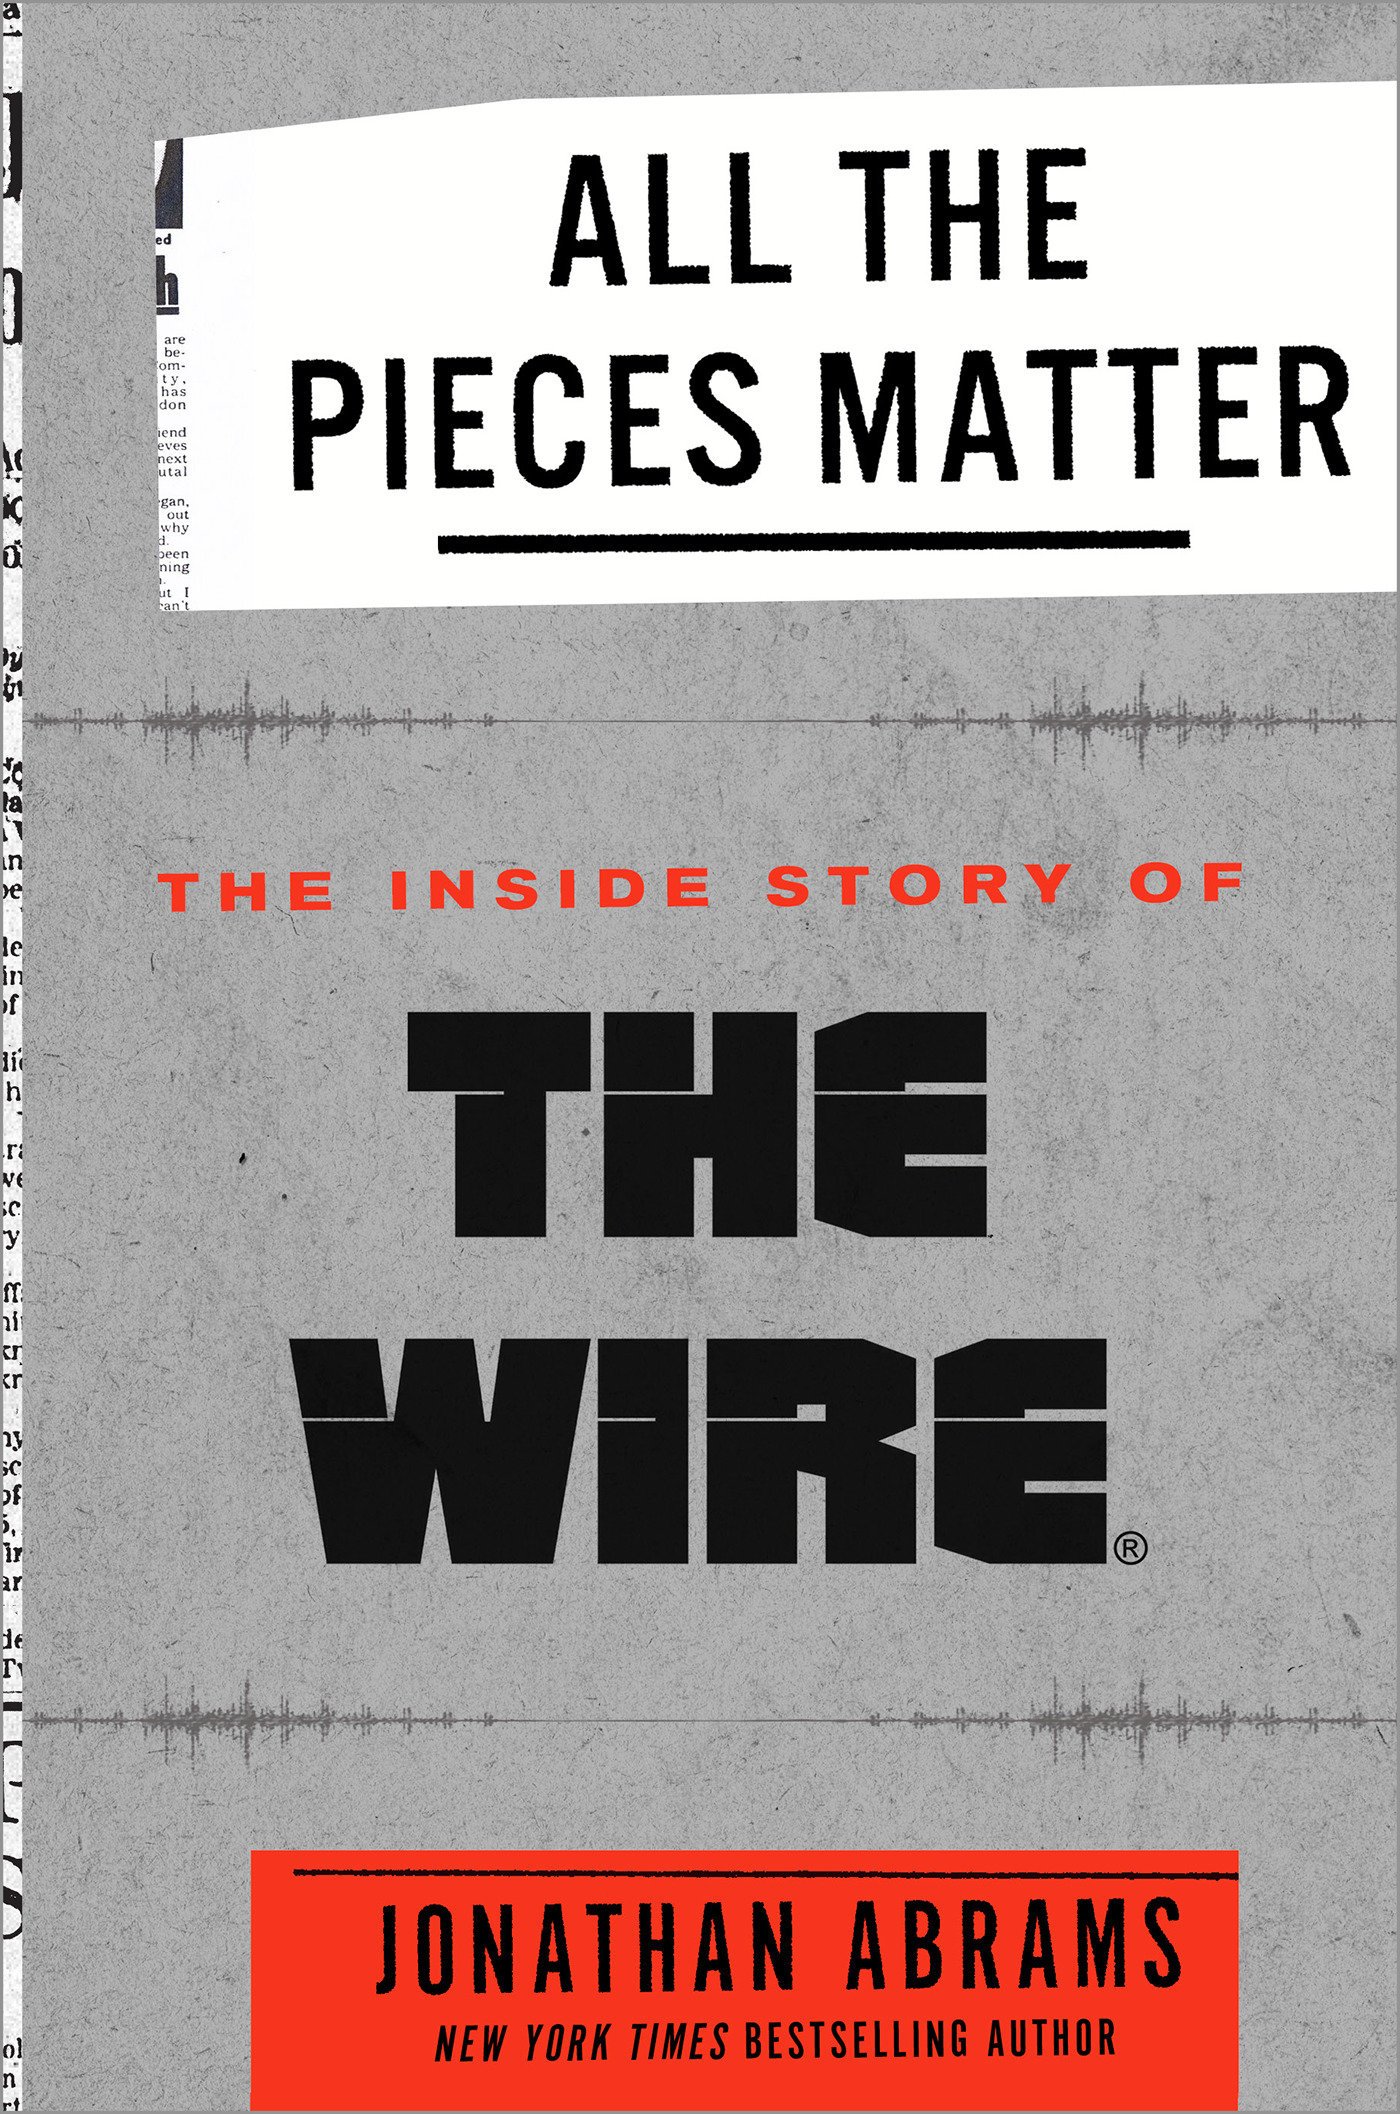 All the Pieces Matter: The Inside Story of the Wire